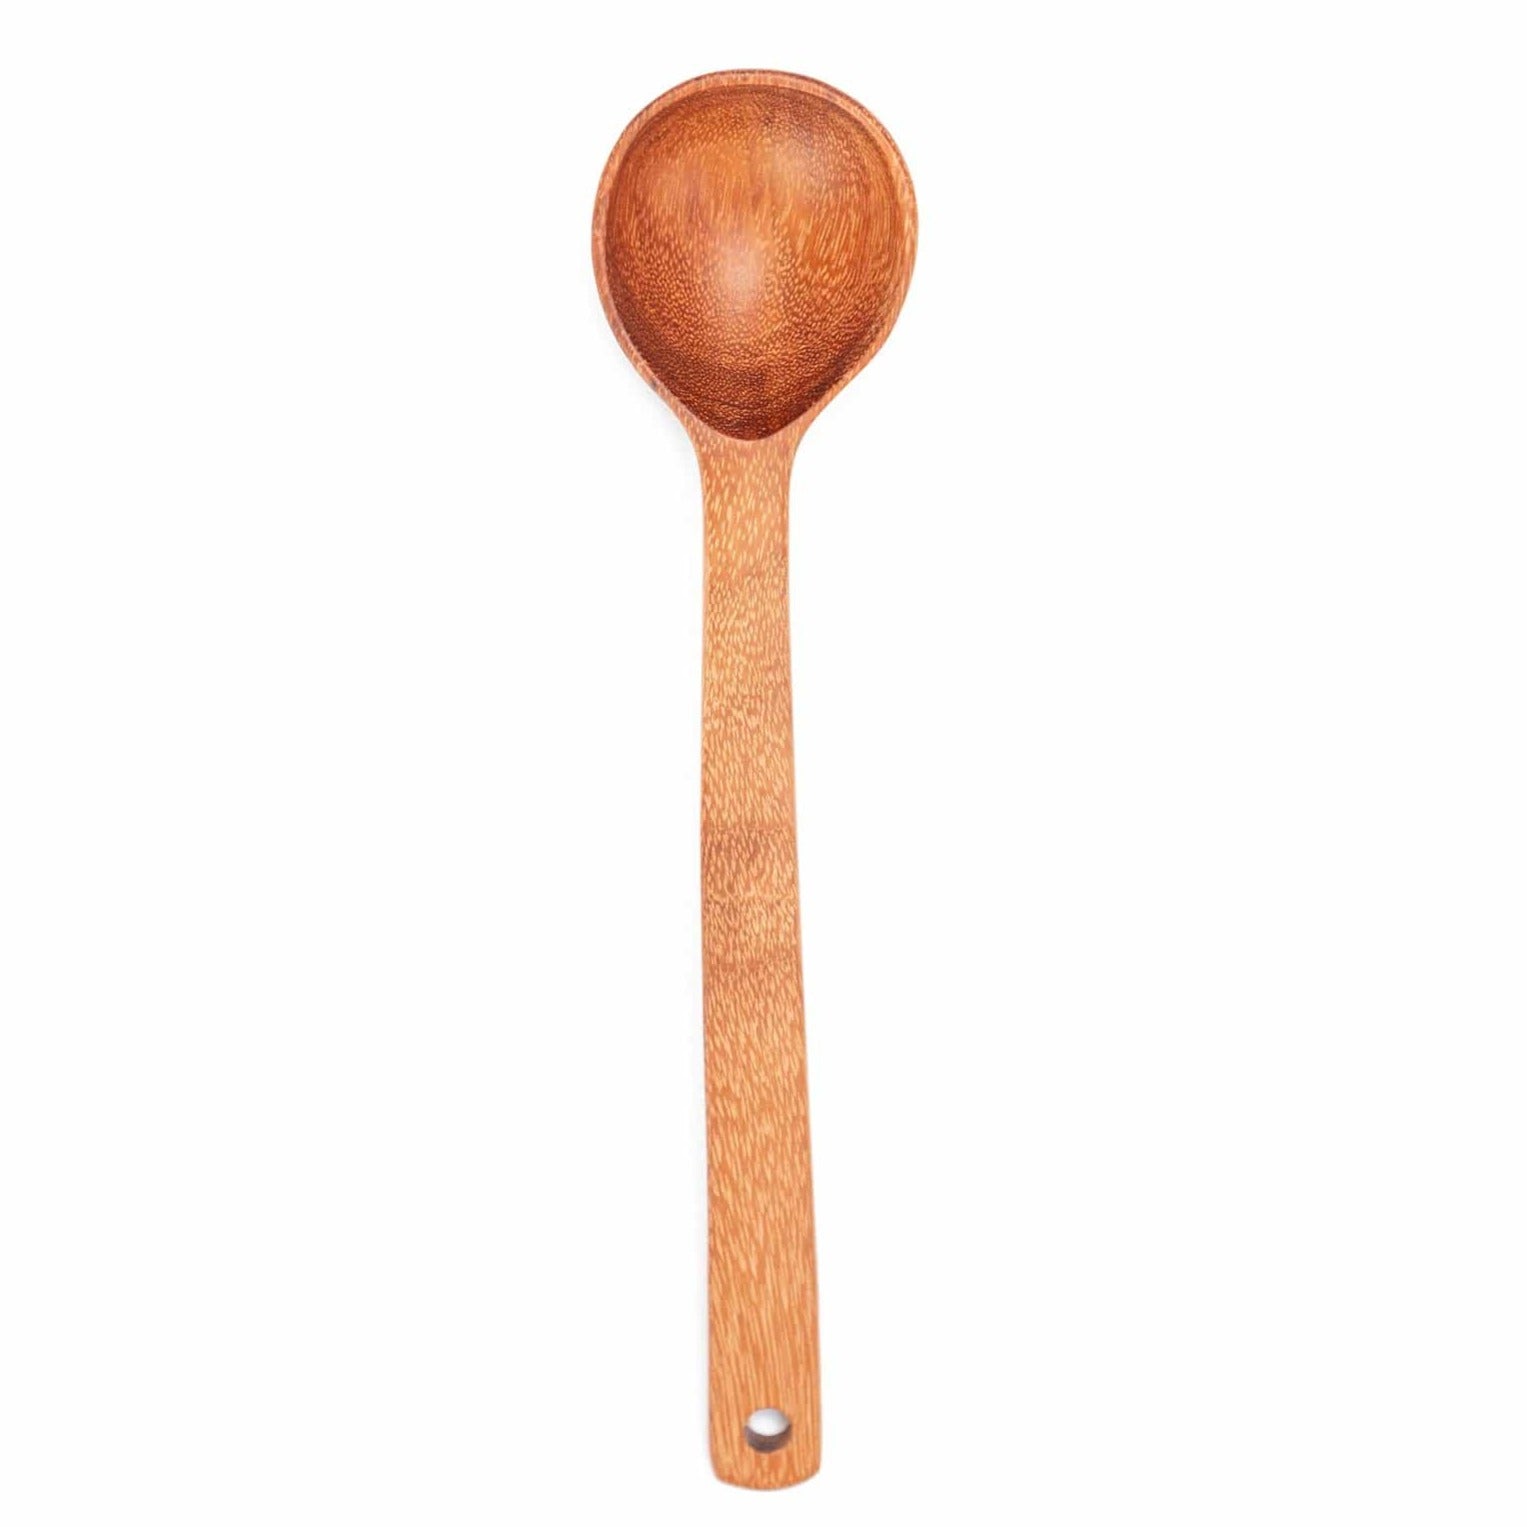 Hand-carved wood coffee scoop: sustainable macawood, laurelwood, or coffeewood. Fair trade, artisan-crafted, unique gift. Elevate your coffee ritual! ✨